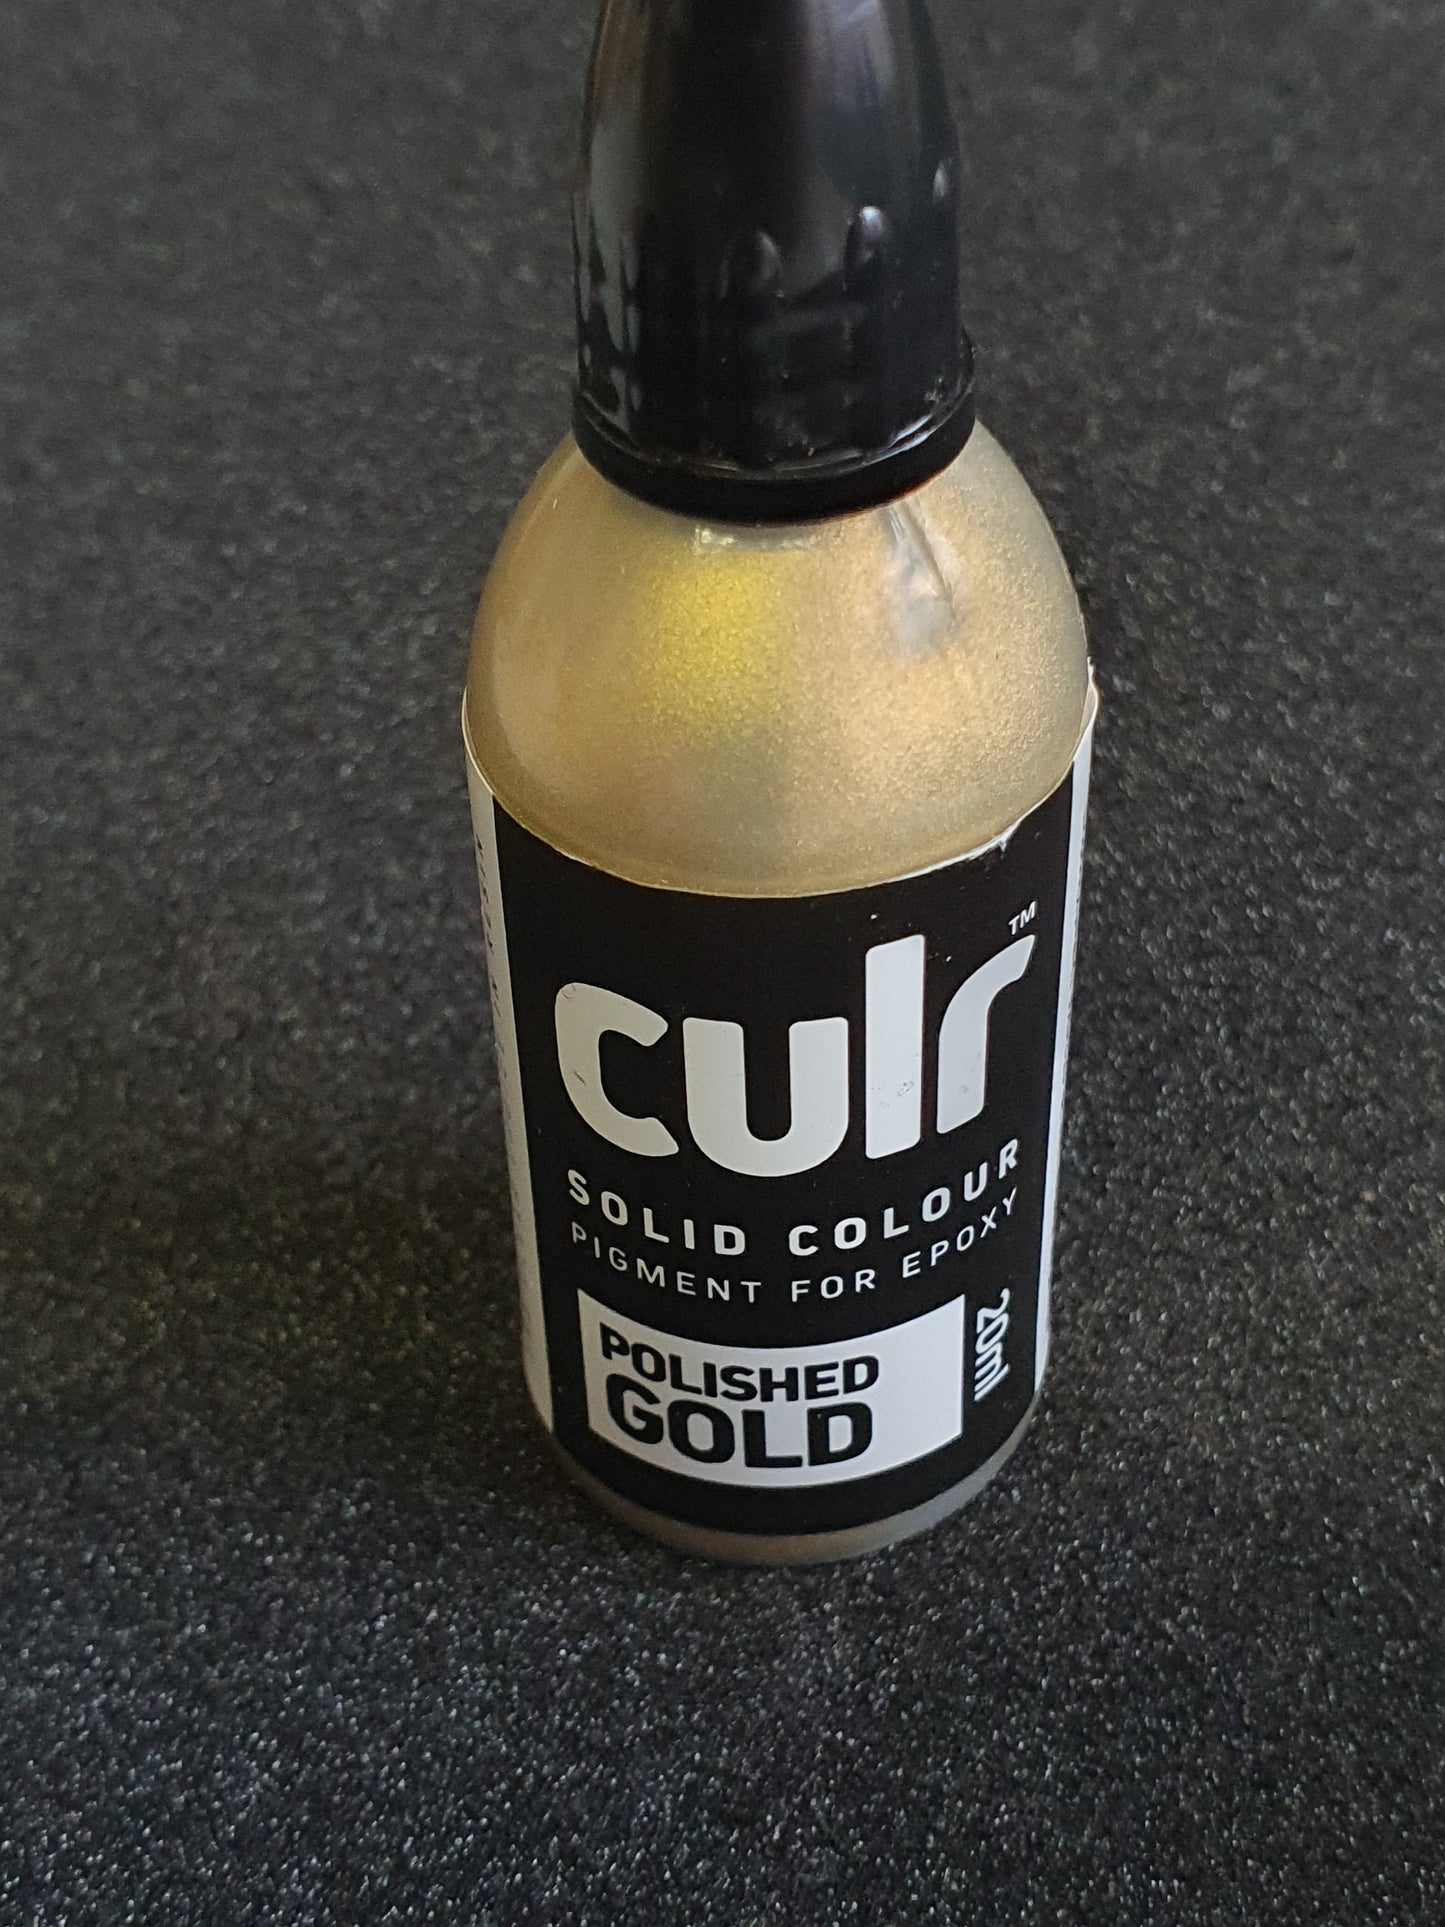 Polished Gold CULR Pigment for Epoxy Resin - GlassCast